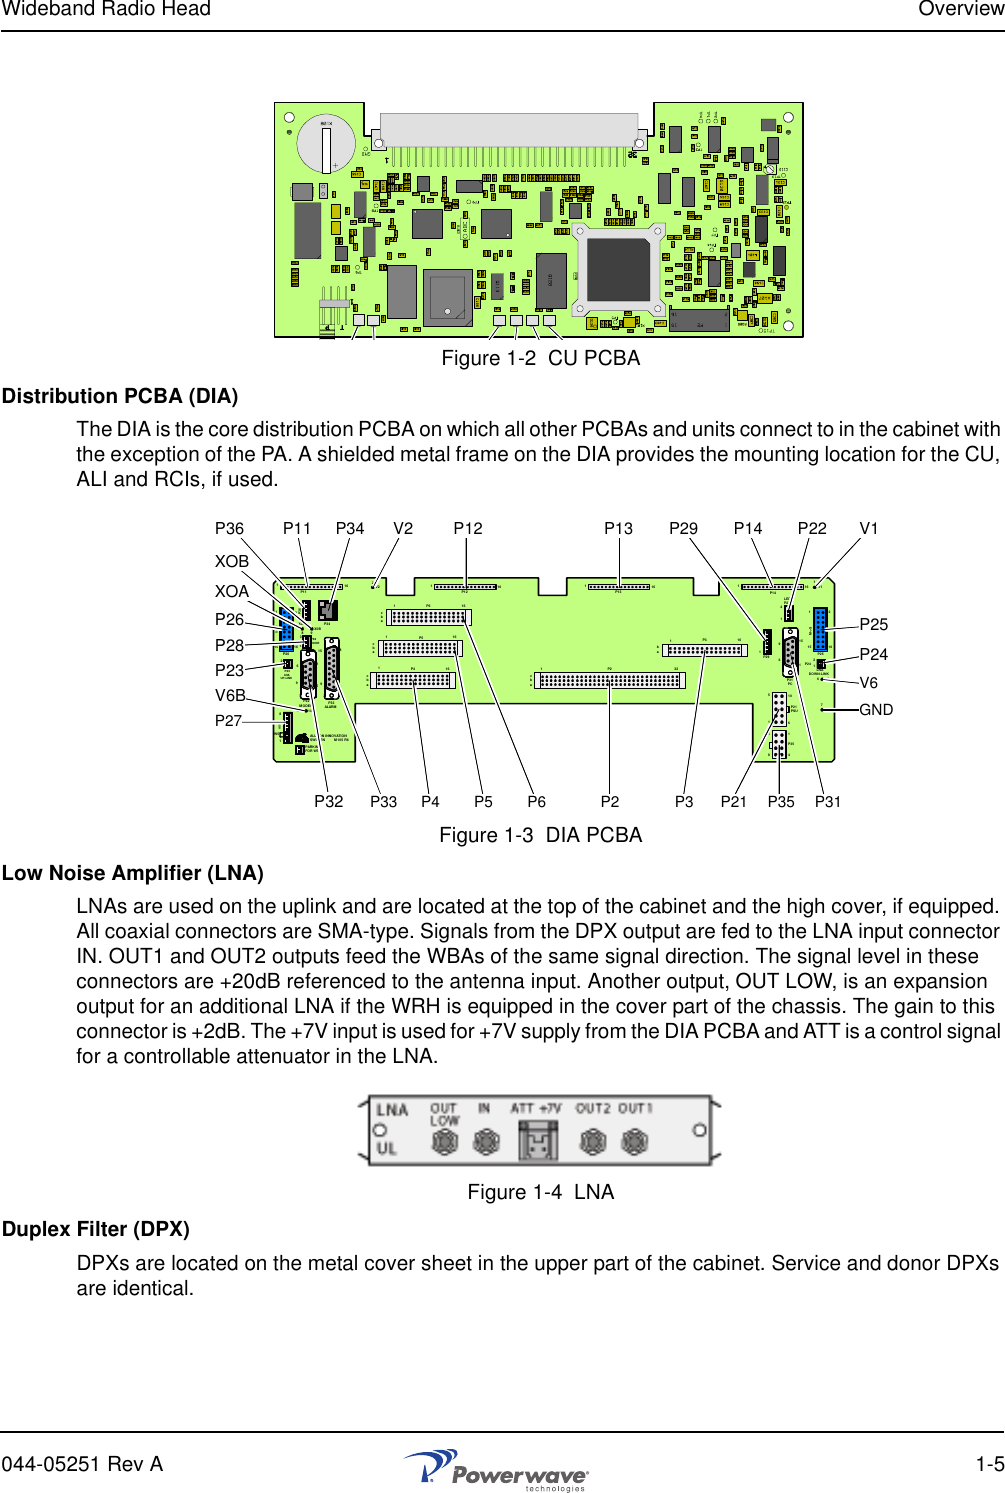 Wideband Radio Head Overview044-05251 Rev A 1-5Figure 1-2  CU PCBADistribution PCBA (DIA)The DIA is the core distribution PCBA on which all other PCBAs and units connect to in the cabinet with the exception of the PA. A shielded metal frame on the DIA provides the mounting location for the CU, ALI and RCIs, if used. Figure 1-3  DIA PCBALow Noise Amplifier (LNA)LNAs are used on the uplink and are located at the top of the cabinet and the high cover, if equipped. All coaxial connectors are SMA-type. Signals from the DPX output are fed to the LNA input connector IN. OUT1 and OUT2 outputs feed the WBAs of the same signal direction. The signal level in these connectors are +20dB referenced to the antenna input. Another output, OUT LOW, is an expansion output for an additional LNA if the WRH is equipped in the cover part of the chassis. The gain to this connector is +2dB. The +7V input is used for +7V supply from the DIA PCBA and ATT is a control signal for a controllable attenuator in the LNA.Figure 1-4  LNADuplex Filter (DPX)DPXs are located on the metal cover sheet in the upper part of the cabinet. Service and donor DPXs are identical.ALLGON INNOVATIONSWEDEN         M105 R61PARKINGFOR W5W58P27 W6B 101P33ALARMP23LNAUP-LINKP32MODEMAUX1P28DOOR596111611M-&gt;SP11P348915P2615 16S-&gt;M12389P365X0AX0B2V2 116P12 P13111161616P4P5P6cbacbacbacba1P2321ba116P316 116P141V111111461156915216124585P35P21PSU610P31PCP29P24P25GND76V6LNADOWN-LINKLEDP2212V6BP27P26P23XOAXOBP28P4 P5 P6 P2 P3  P31  P21   P35 P33P32P11 P12 P13 V1P14 P22P29P34 V2P36V6GNDP25P24